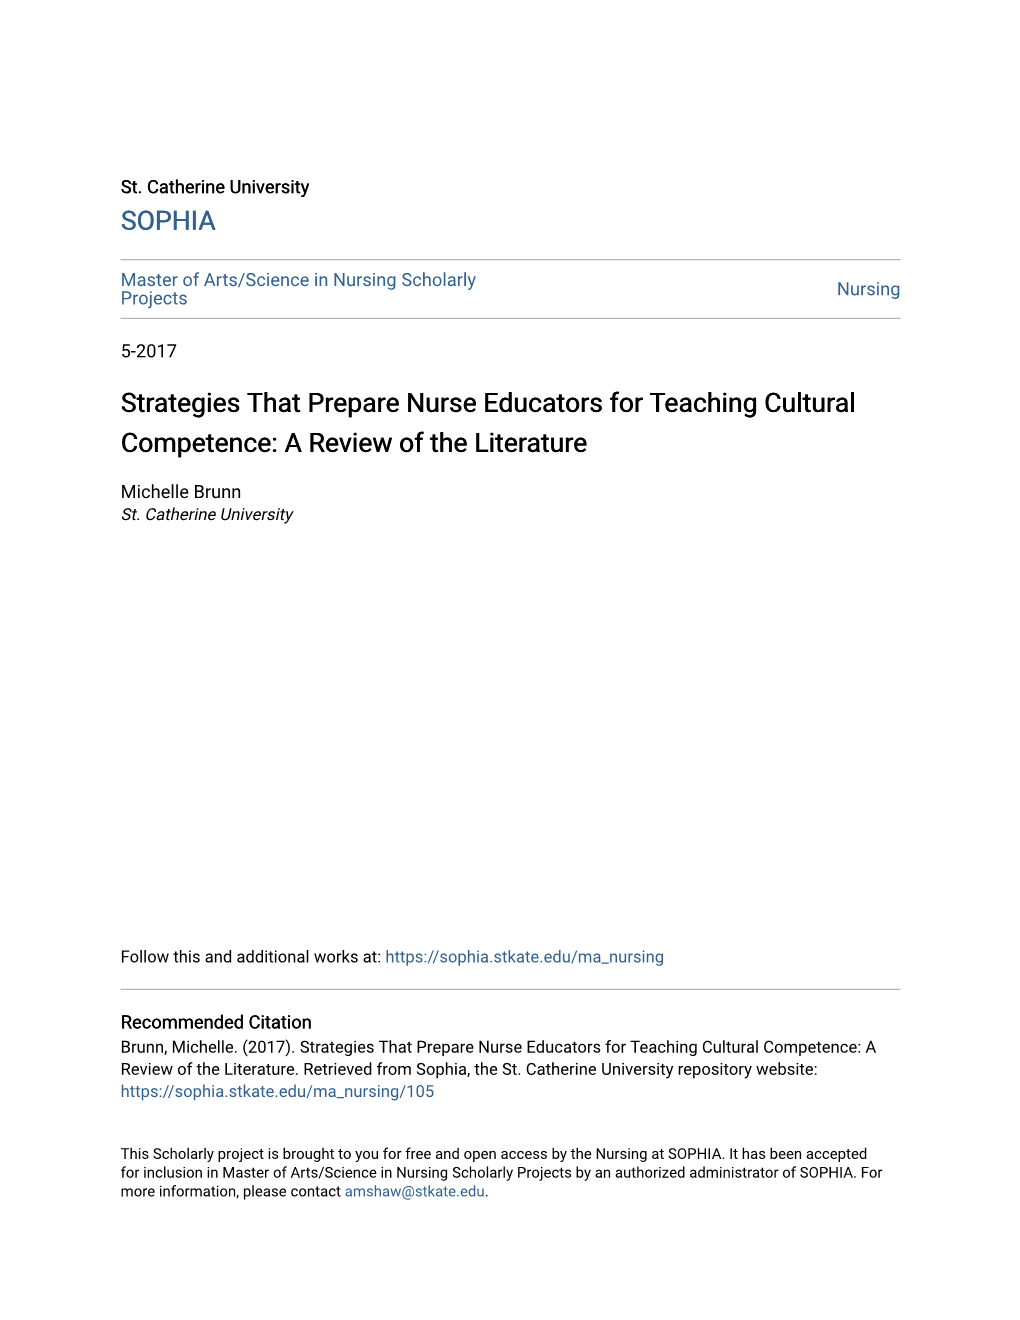 Strategies That Prepare Nurse Educators for Teaching Cultural Competence: a Review of the Literature